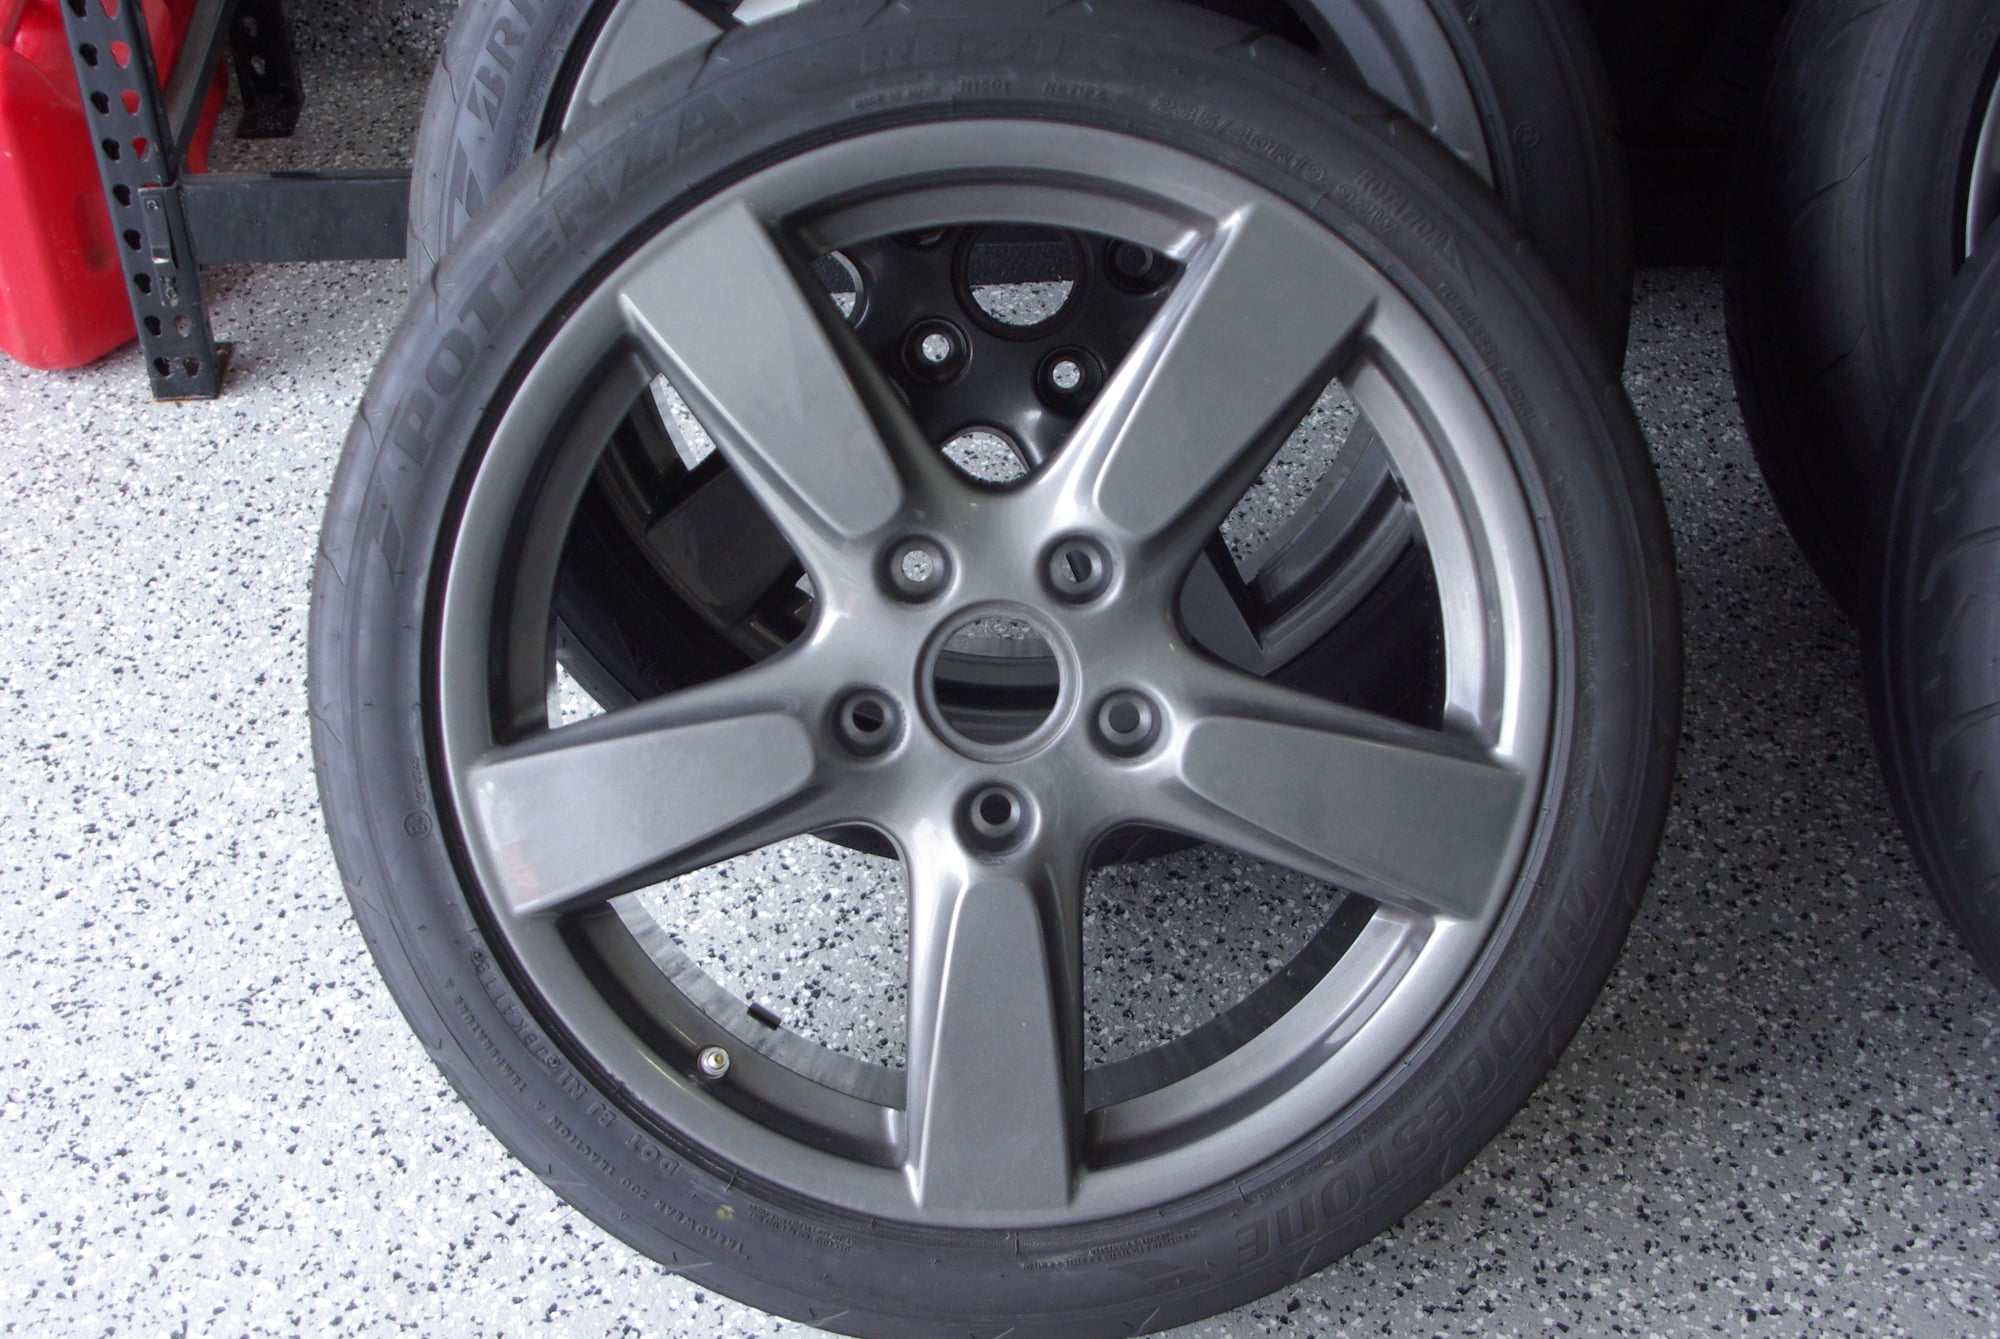 Wheels and Tires/Axles - 19" Cayman / Boxster 5 spoke Porsche wheels with Bridgestone RE71s - Used - 2013 to 2020 Porsche Boxster - 2014 to 2020 Porsche Cayman - Overland Park, KS 66224, United States